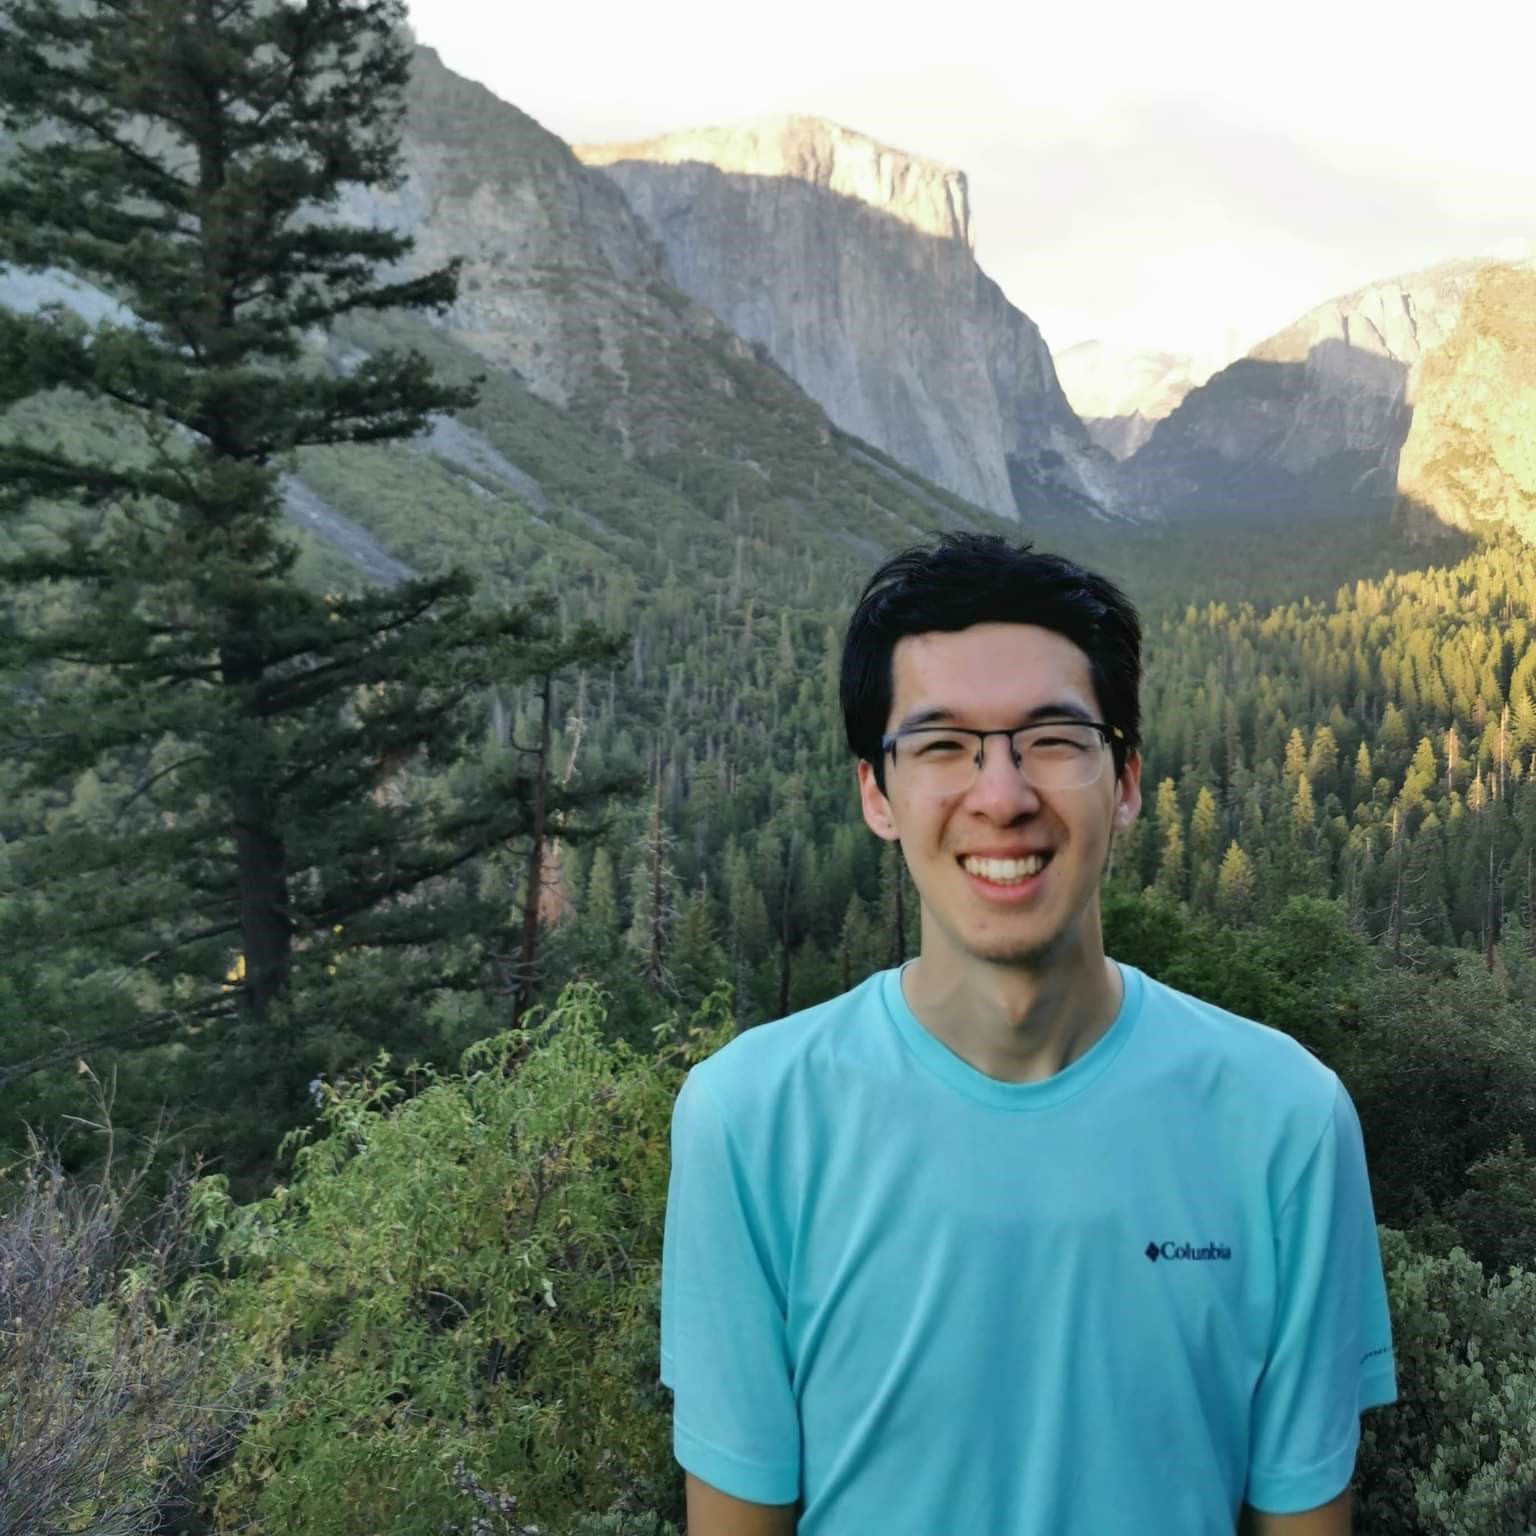 Portrait of Jimmy smiling in front of a wilderness and mountain landscape